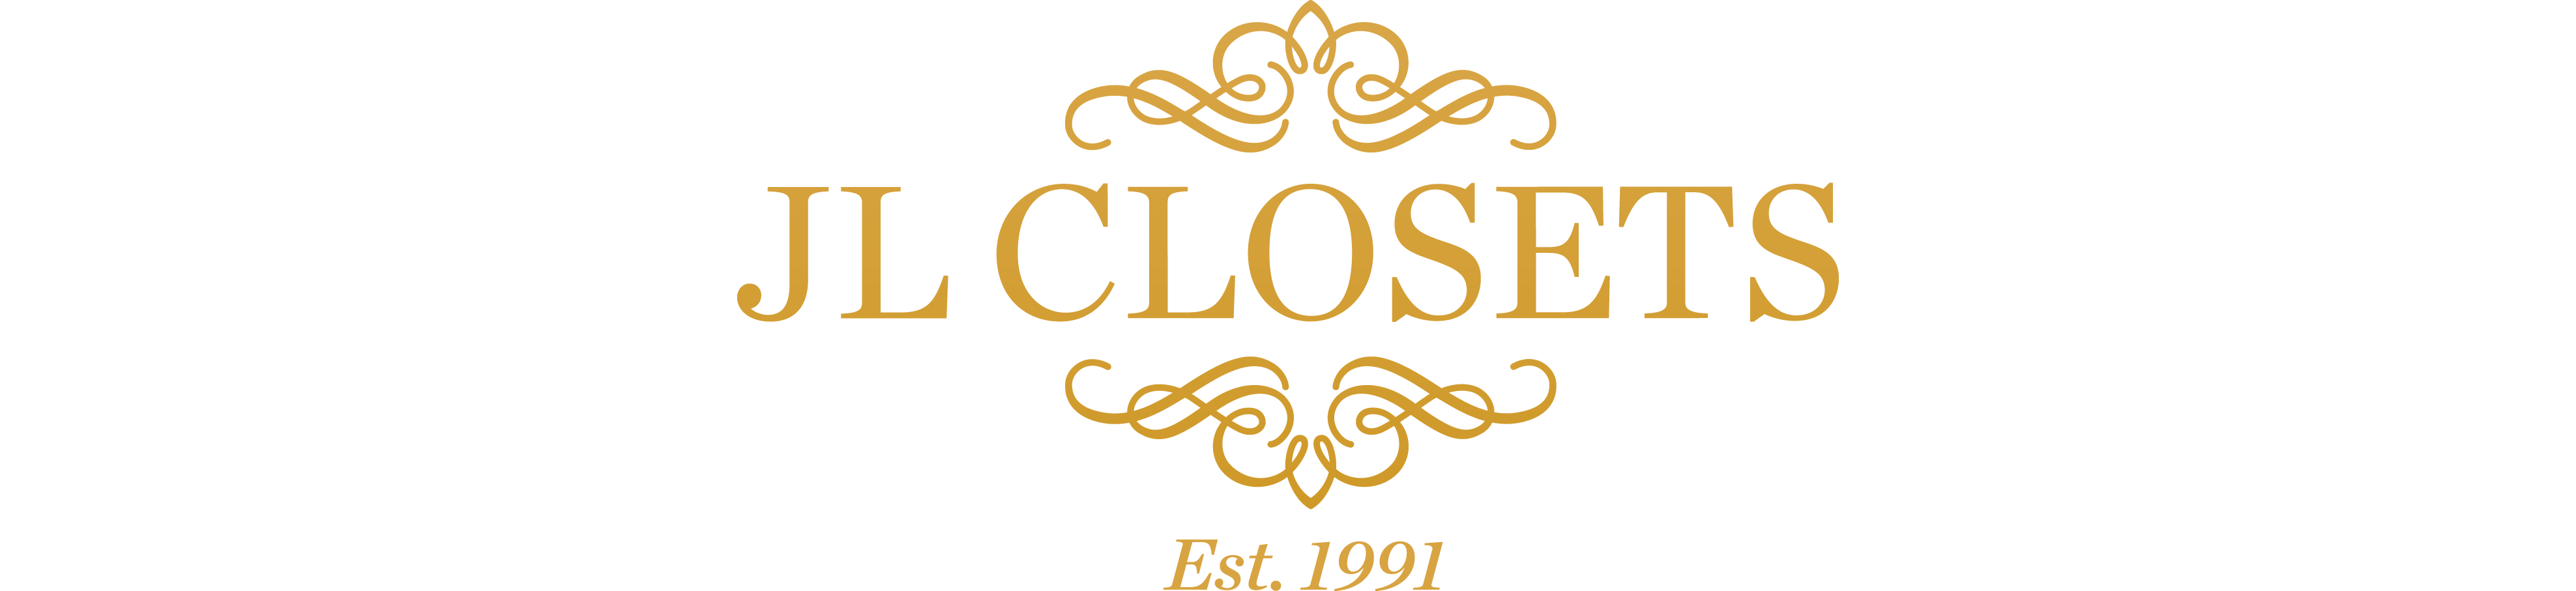 JL Closets is Awarded 2017 Best Cabinetry Design Award by ASID Florida South